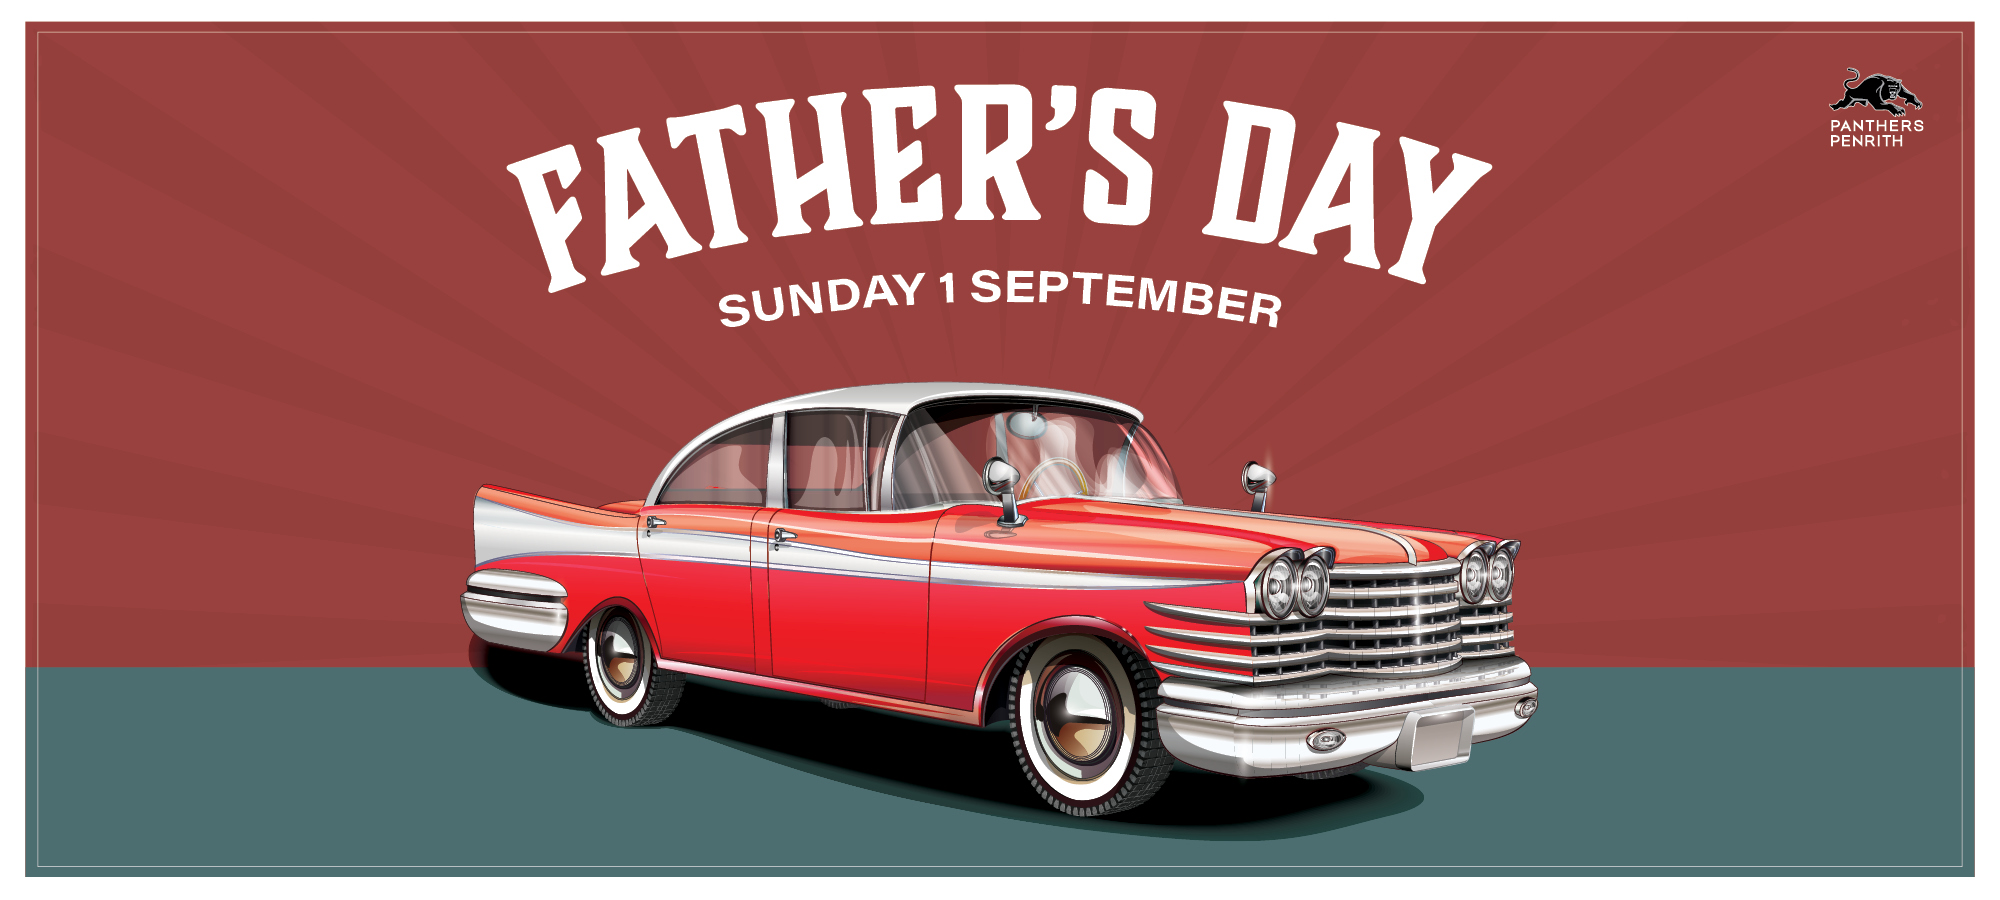 Father’s Day Car Show & Carnival